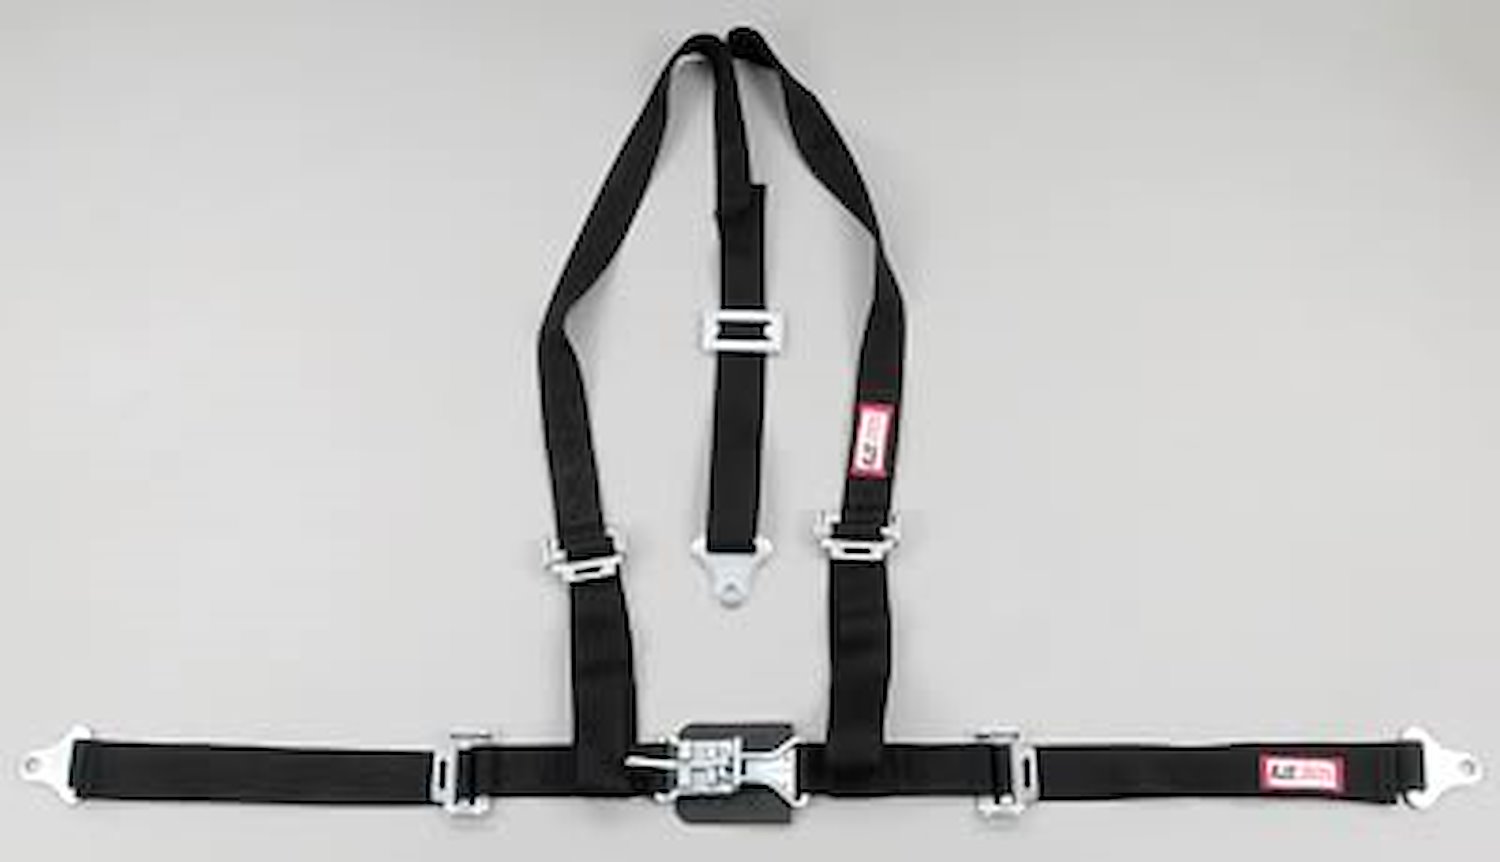 NON-SFI L&L HARNESS 3 PULL DOWN Lap Belt w/adjuster 2 S.H. Individual FLOOR Mount ALL WRAP ENDS RED